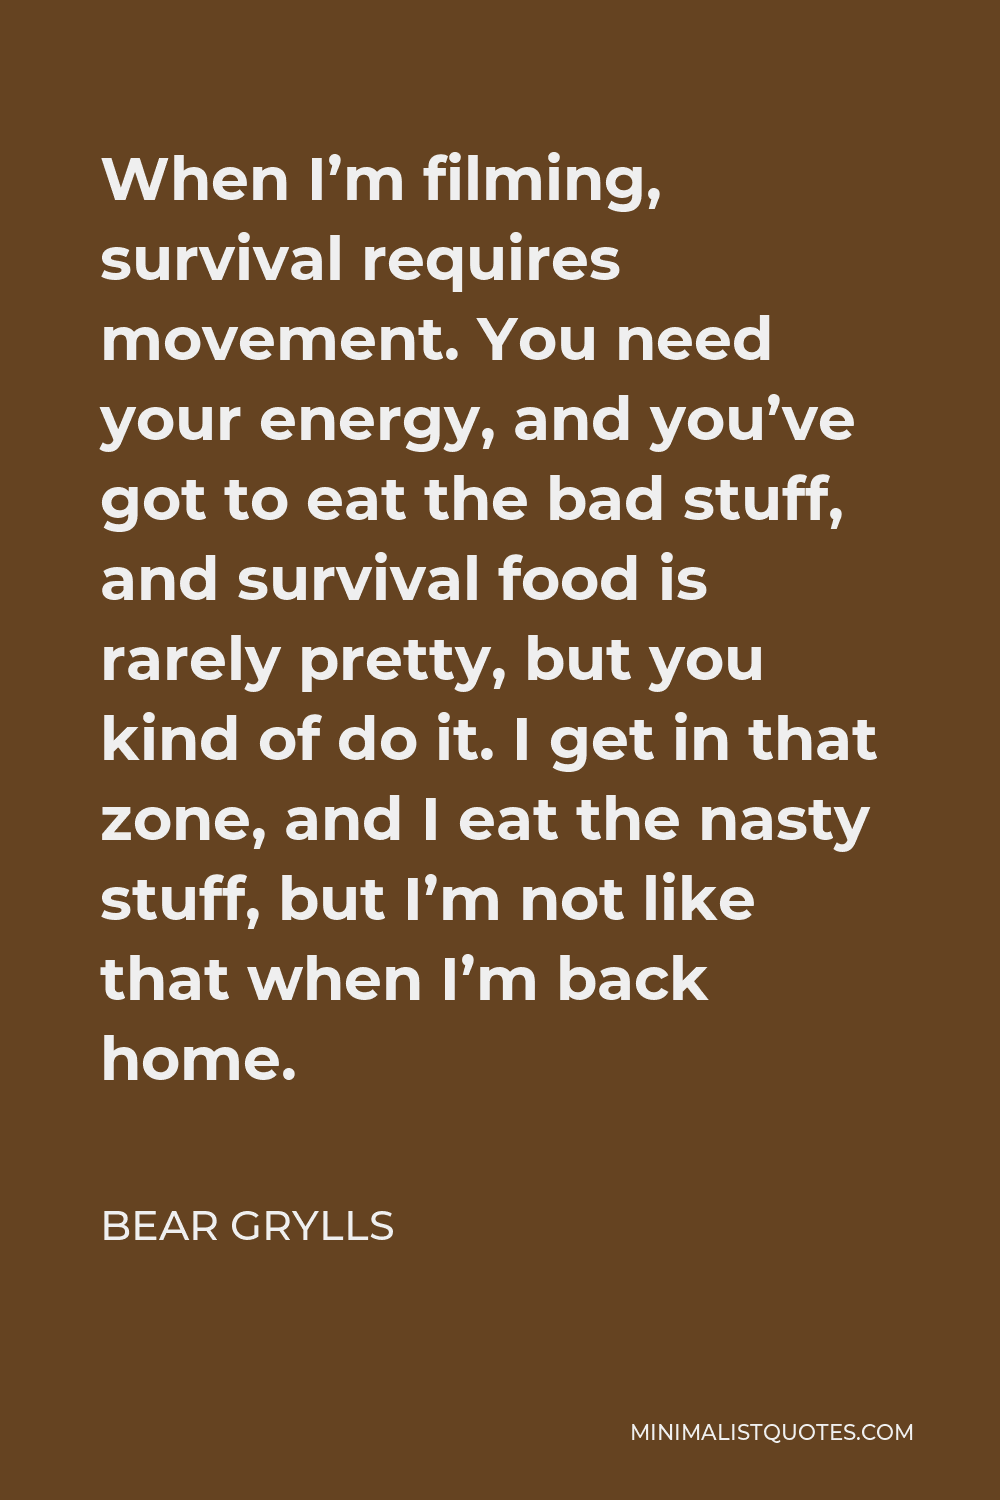 Bear Grylls Quote - When I’m filming, survival requires movement. You need your energy, and you’ve got to eat the bad stuff, and survival food is rarely pretty, but you kind of do it. I get in that zone, and I eat the nasty stuff, but I’m not like that when I’m back home.